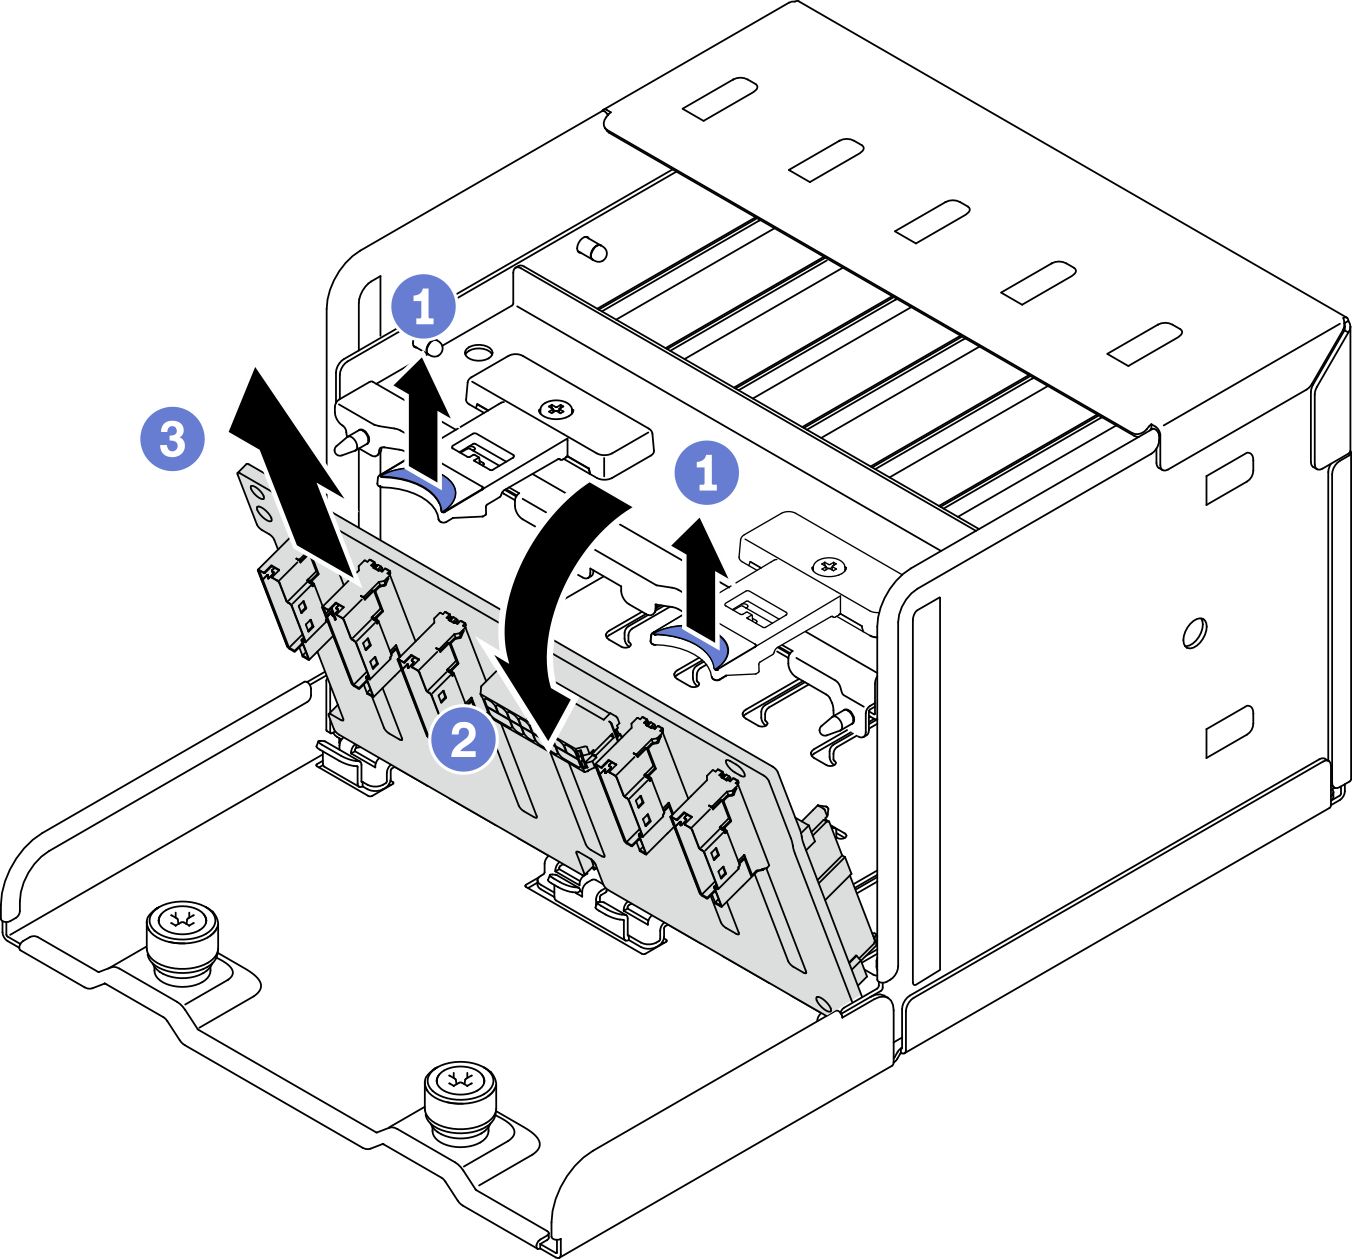 Removing the 2.5-inch drive backplane